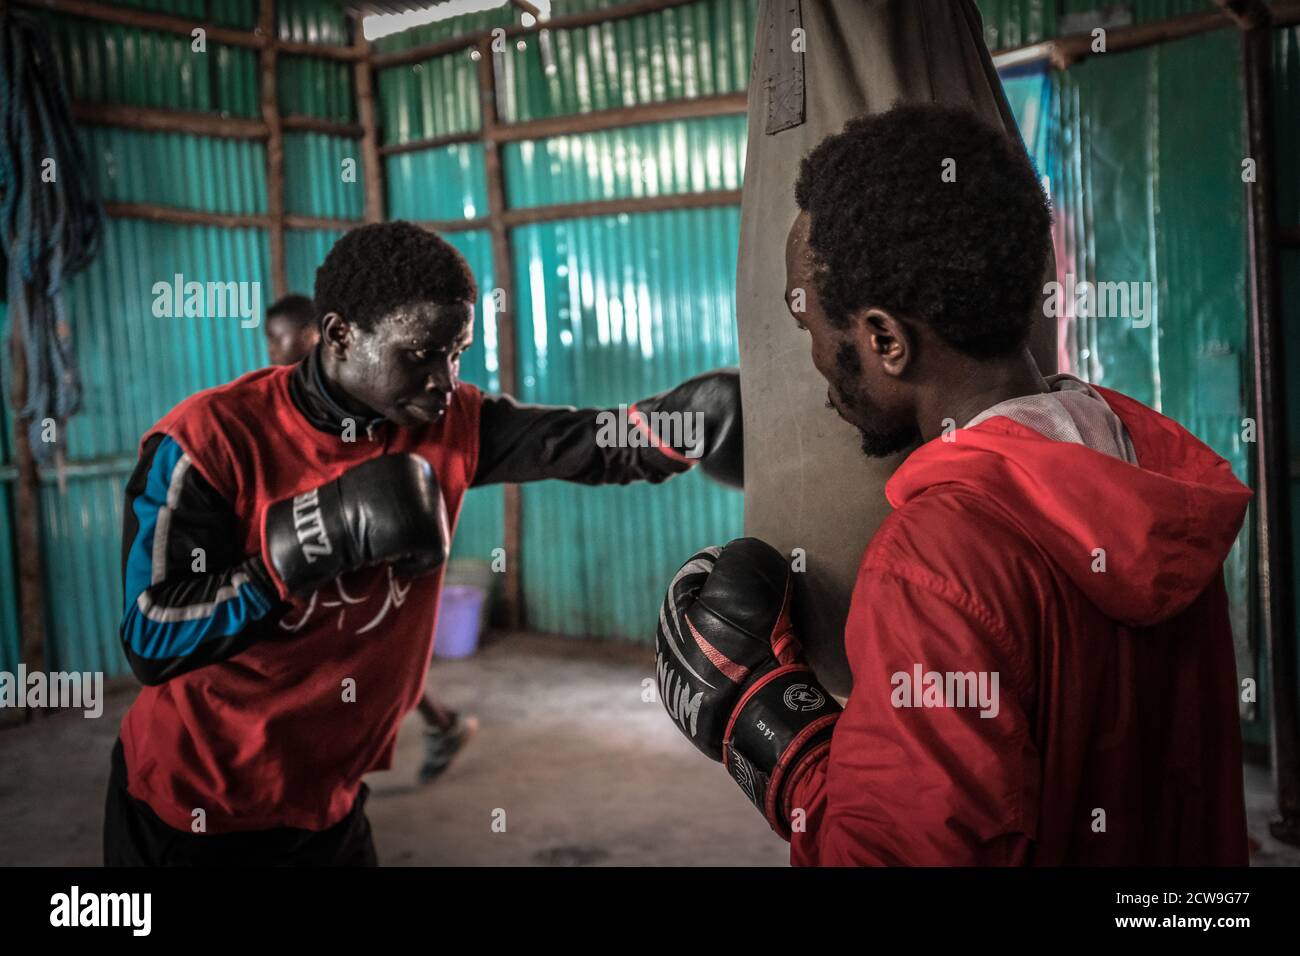 18 year old Muhhamed Hussein (L) alongside his fellow team mate Ahmed Abdalla (R) are seen challenging each other in a boxing match at the local Gym space in Kibera.Kenya well known